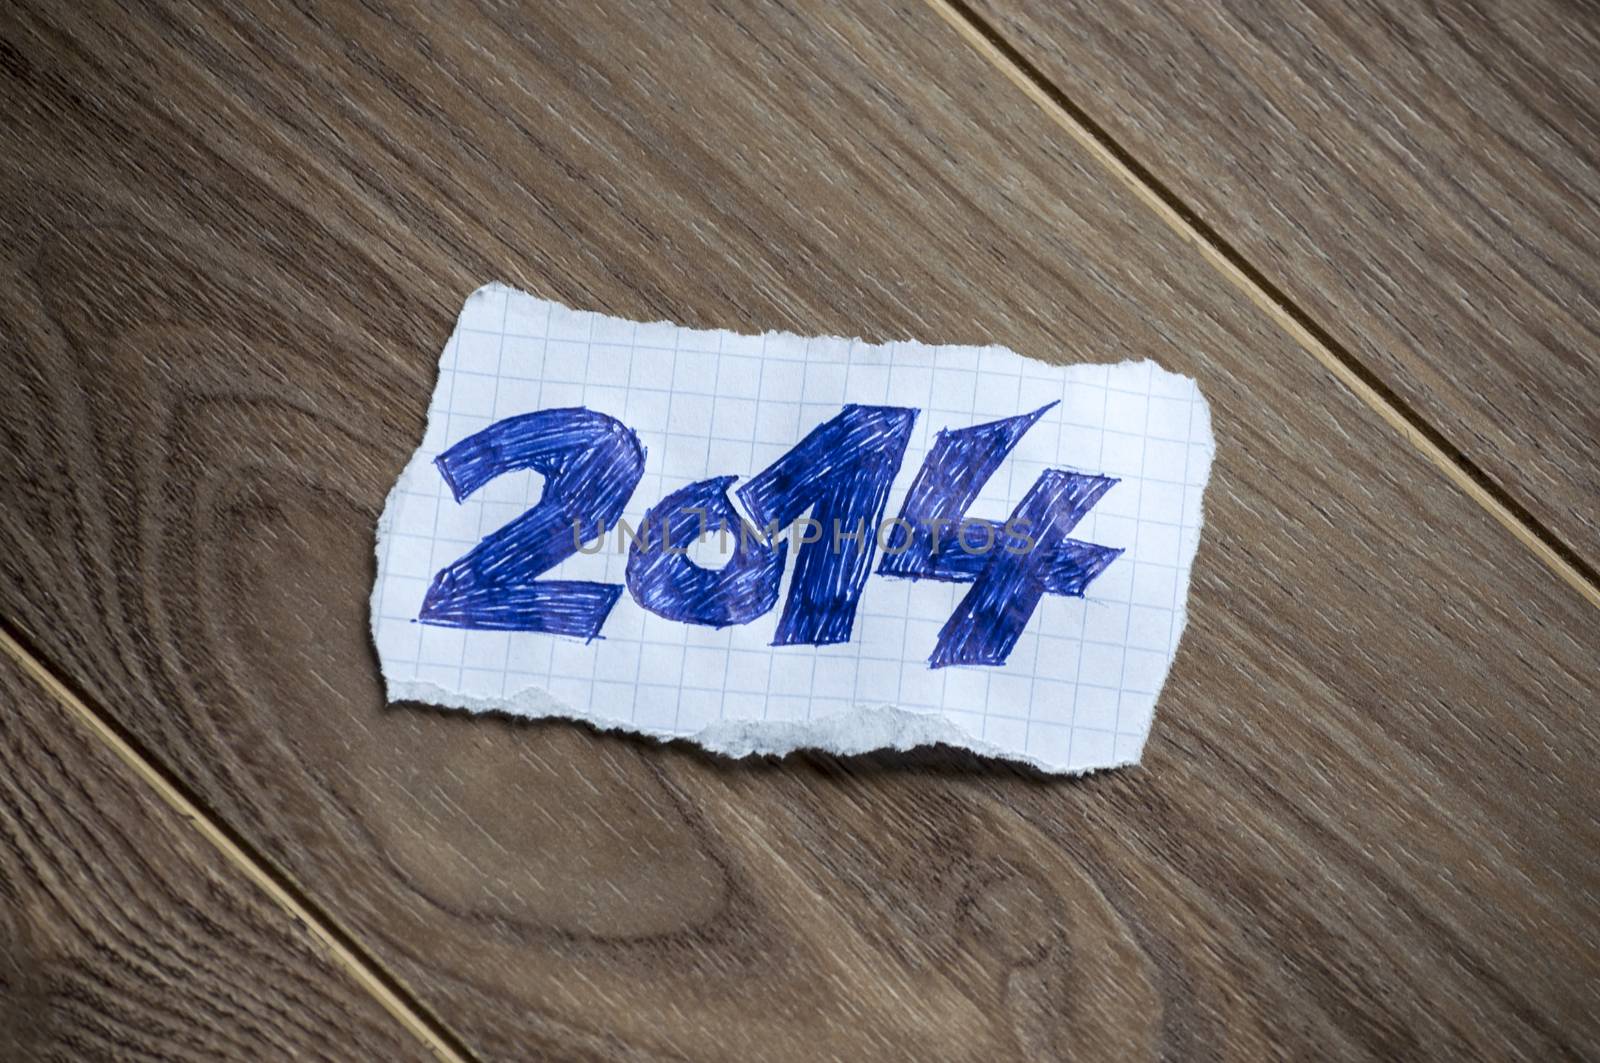 New Year written on piece of paper, on a wood background.